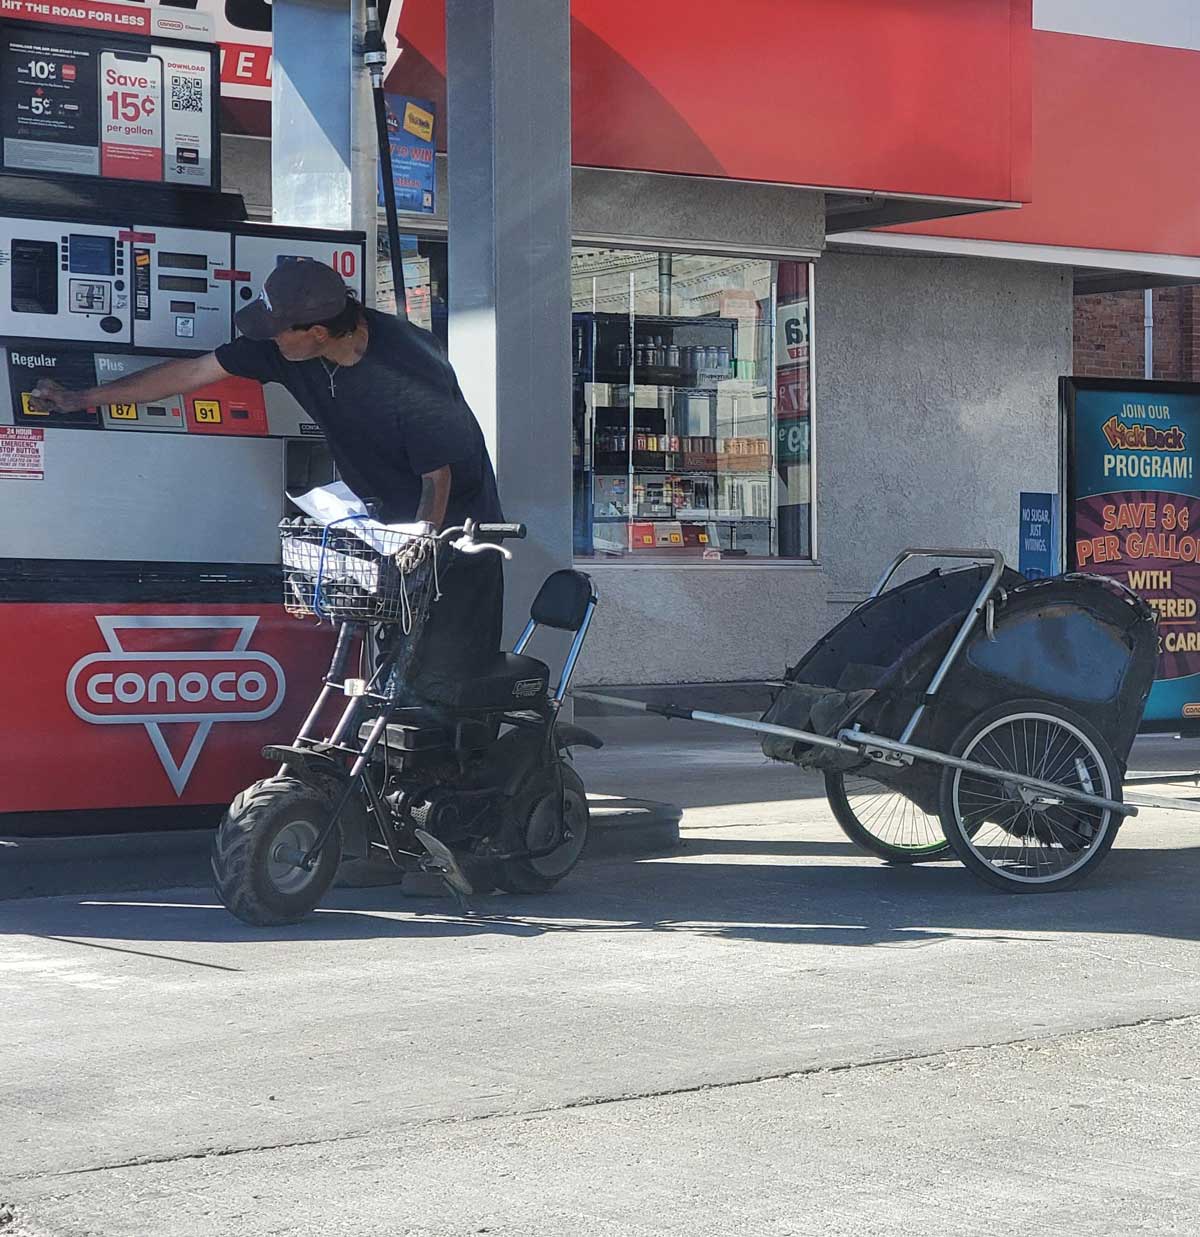 Spotted in Pueblo, CO. How many mpg you think he gets on that hog?